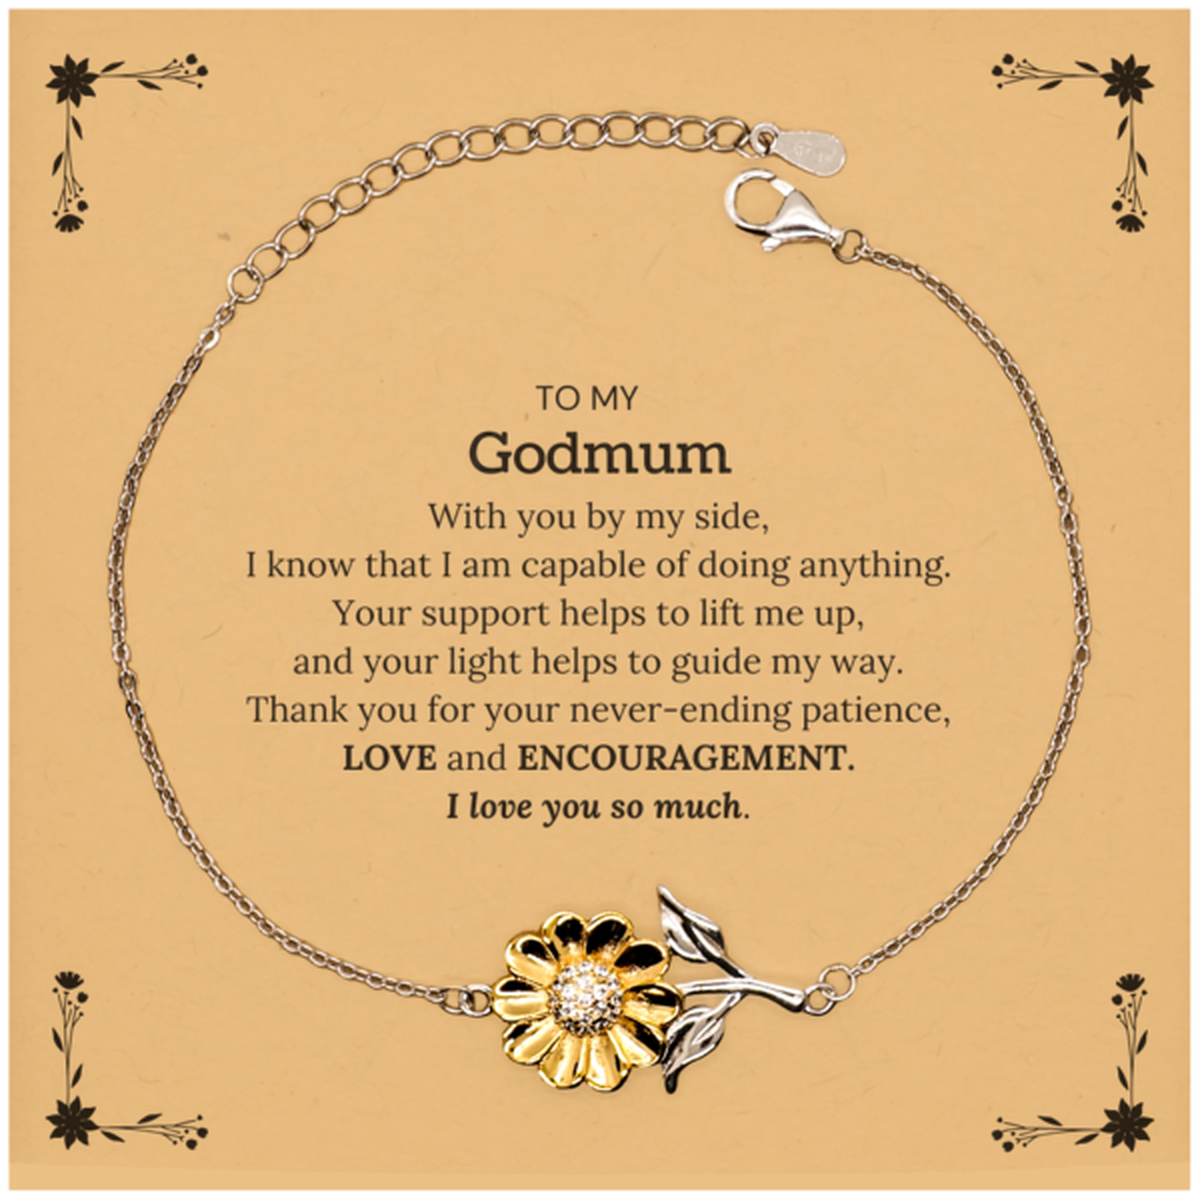 Appreciation Godmum Sunflower Bracelet Gifts, To My Godmum Birthday Christmas Wedding Keepsake Gifts for Godmum With you by my side, I know that I am capable of doing anything. I love you so much